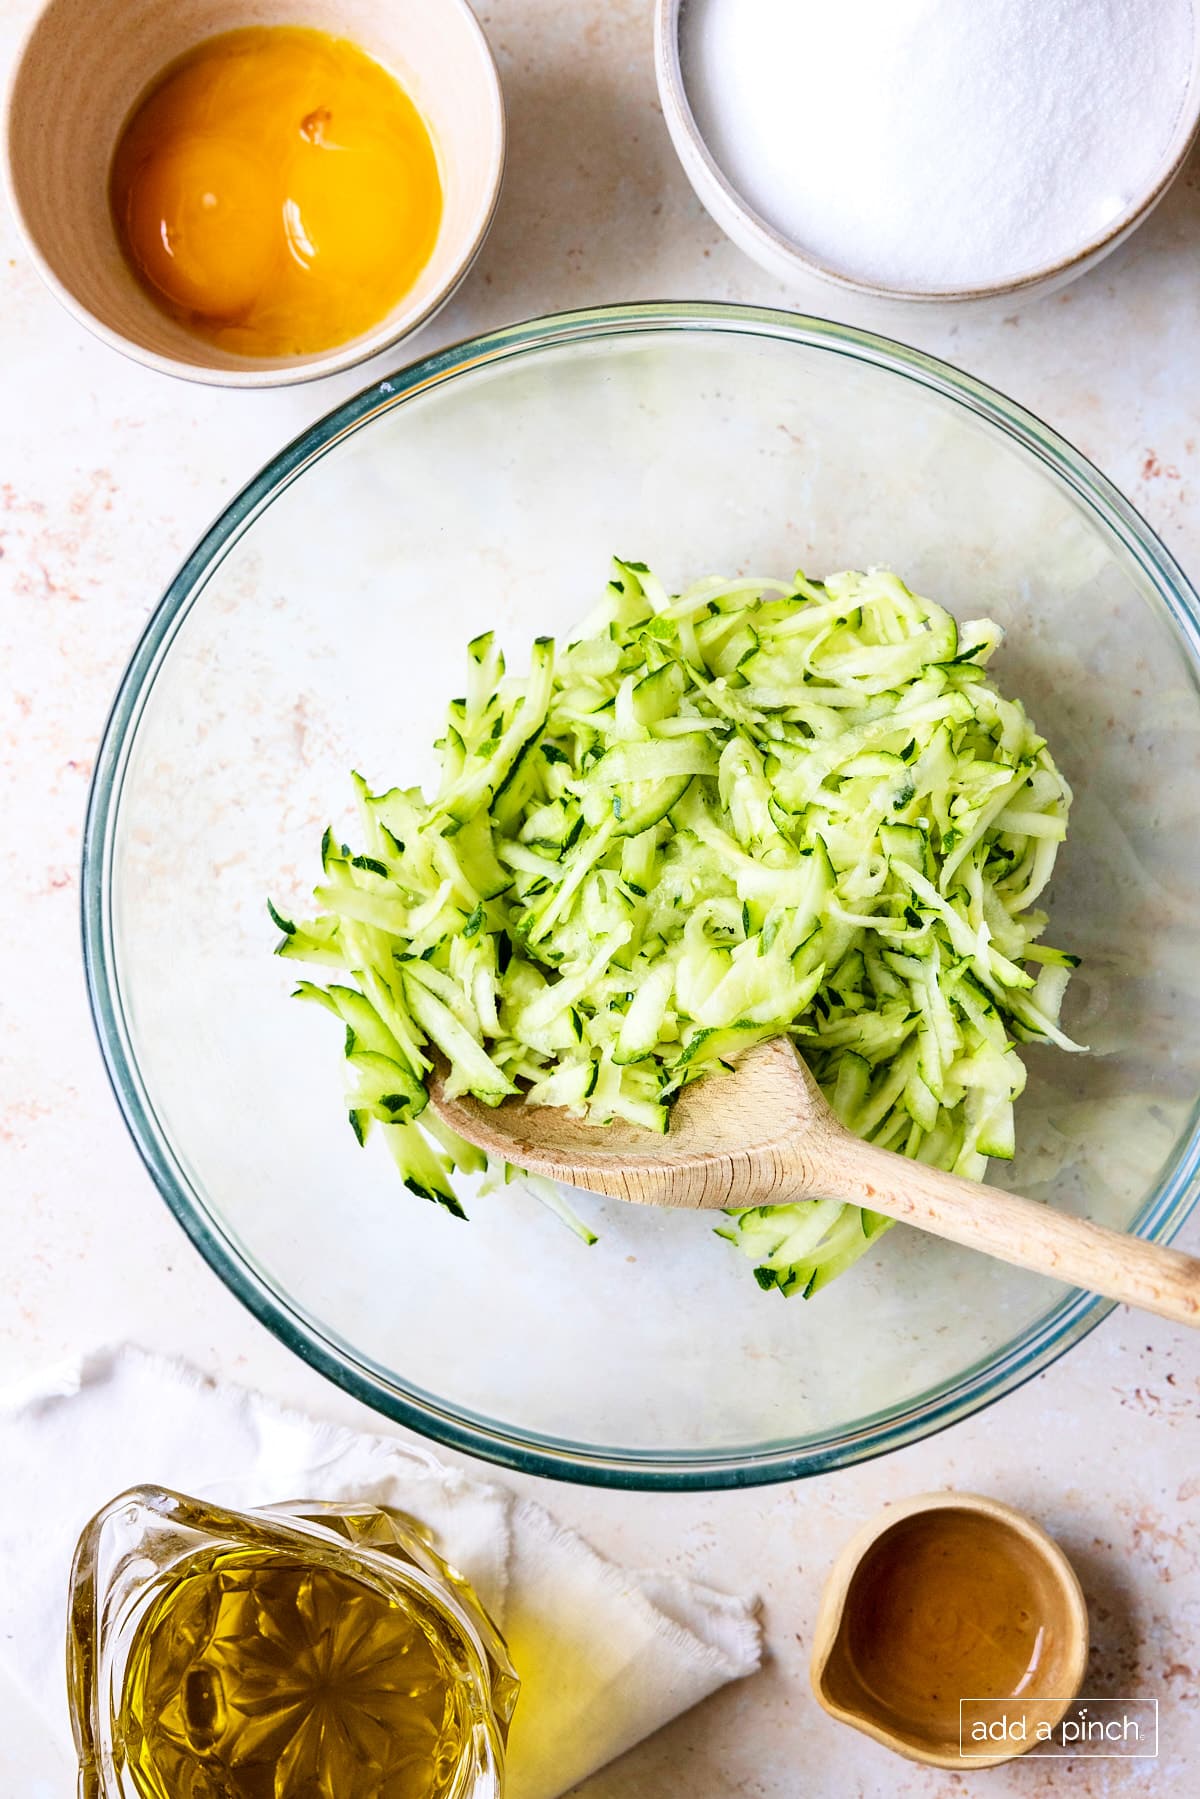 Photo of grated zucchini in a glass bowl with a wooden spoon